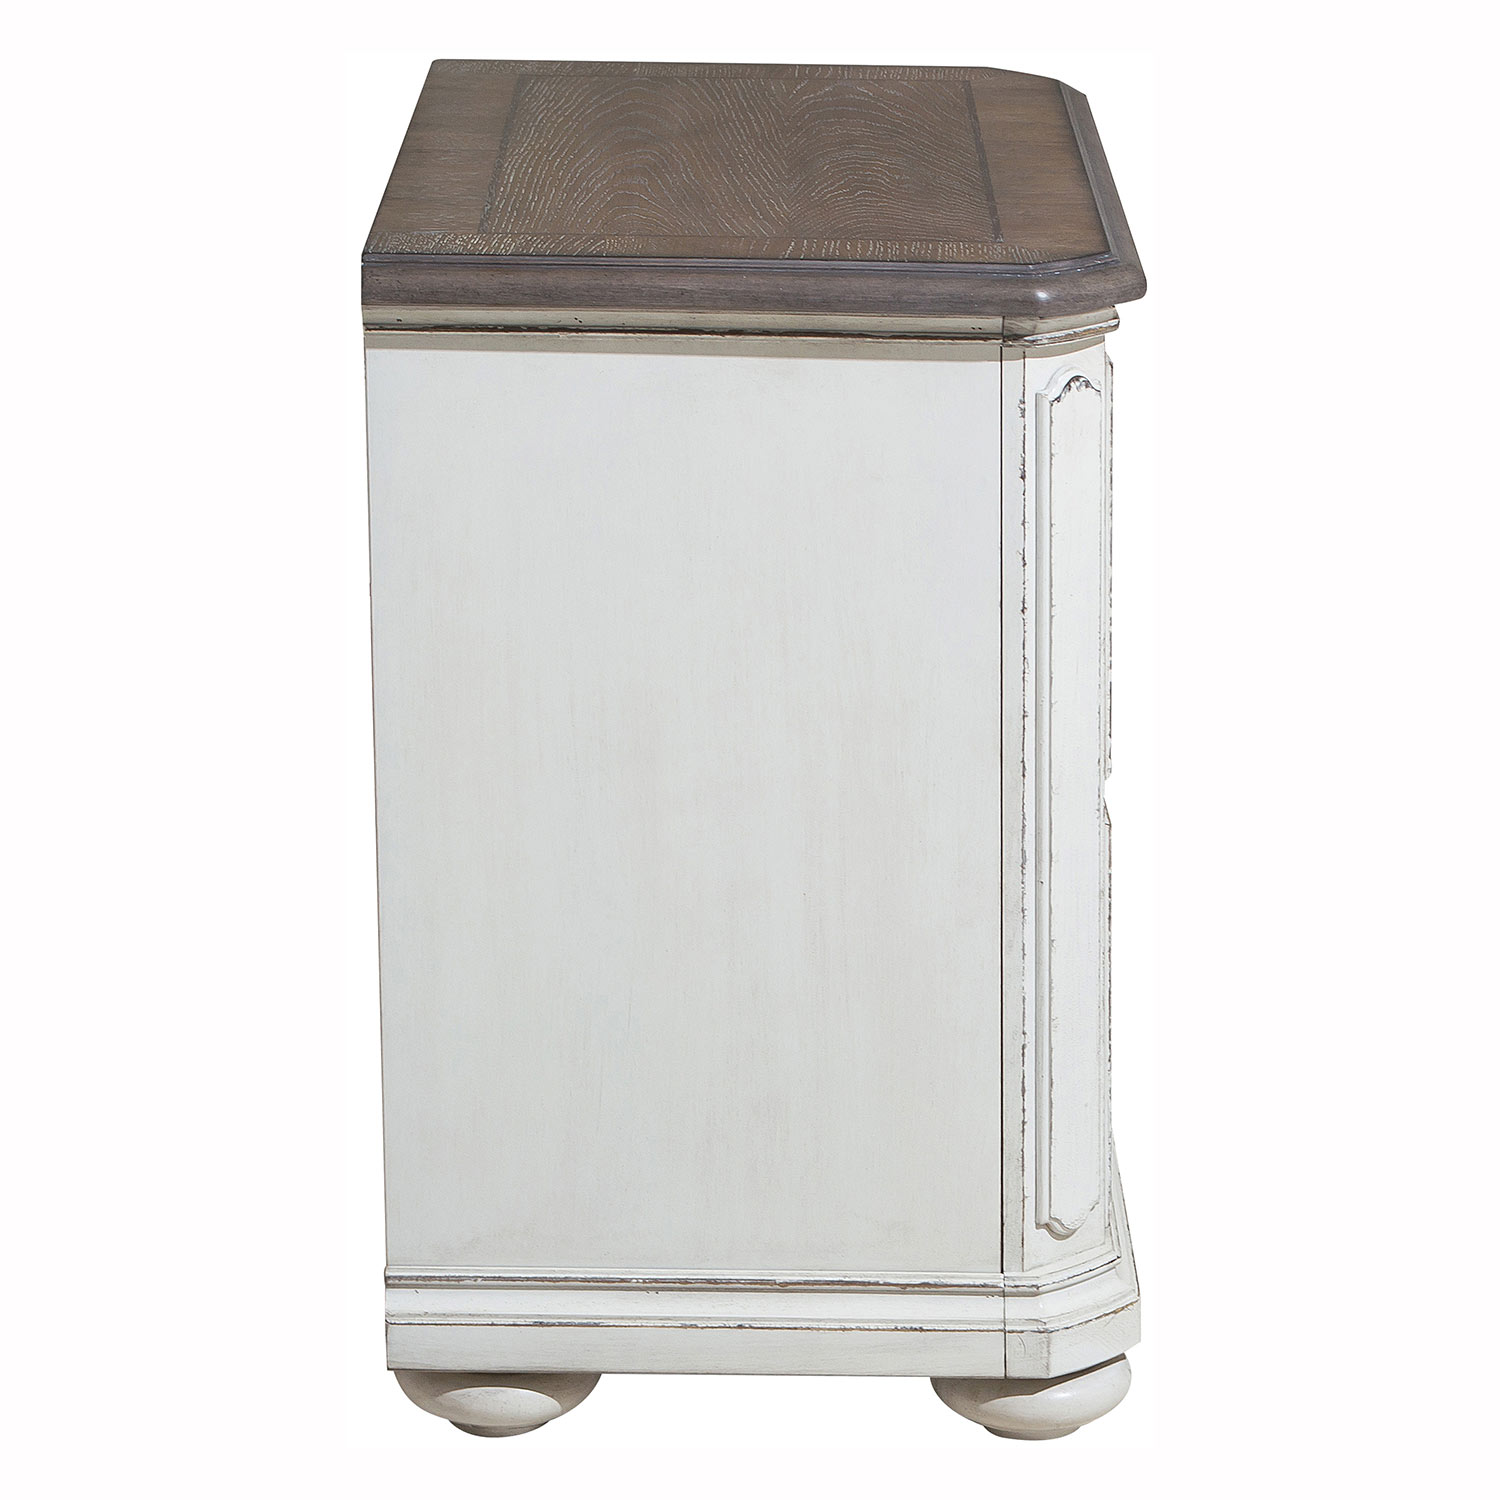 Homelegance Willowick Night Stand - Antique White